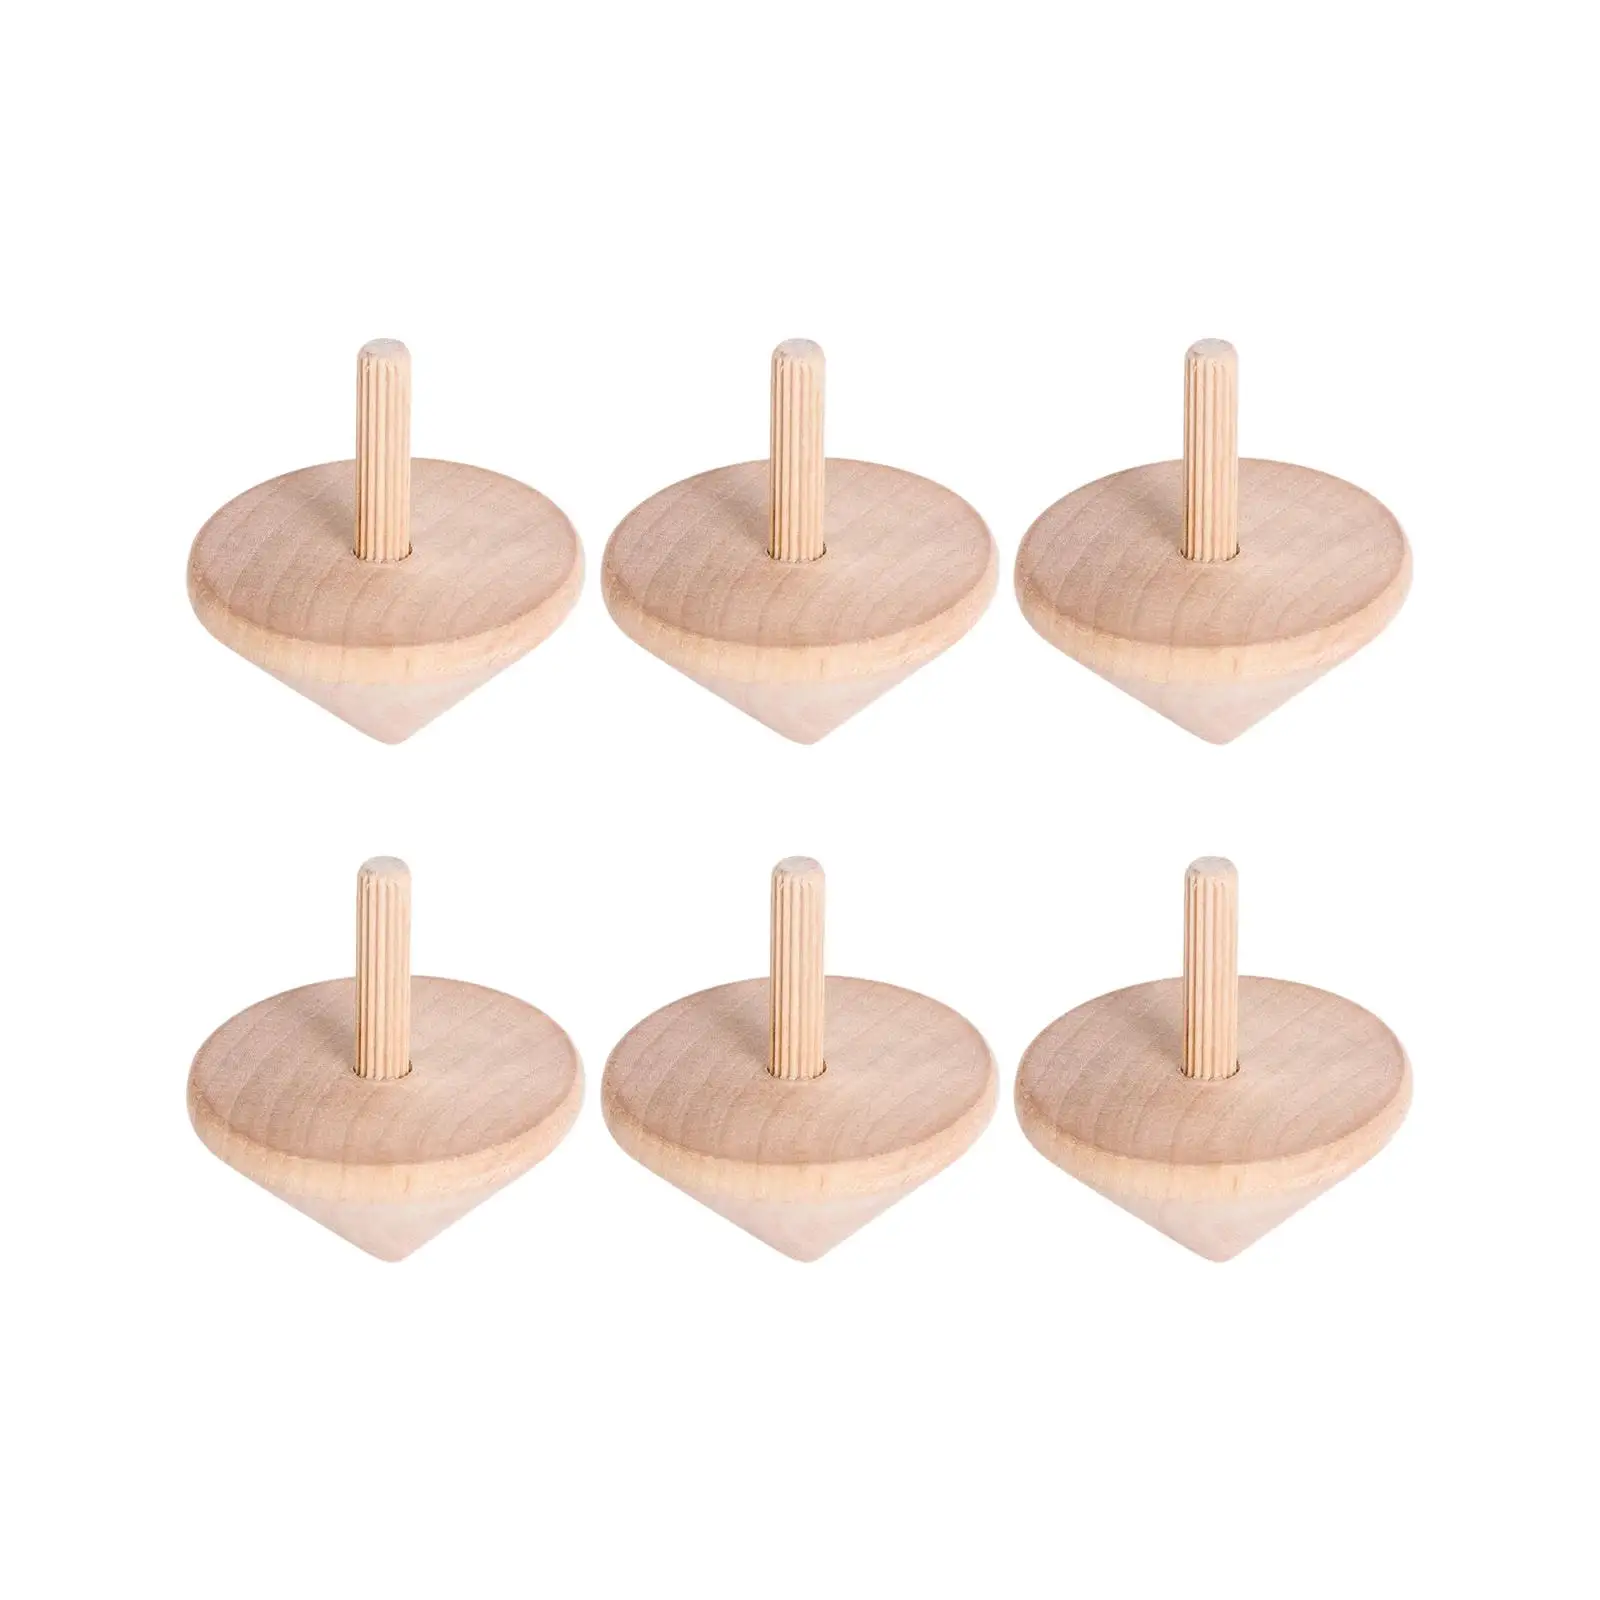 6Pcs Unpainted Wood Blank Tops Educational Toys Wooden Top Novelty Wooden Gyroscopes Toy for Kids Children Party Supplies Games